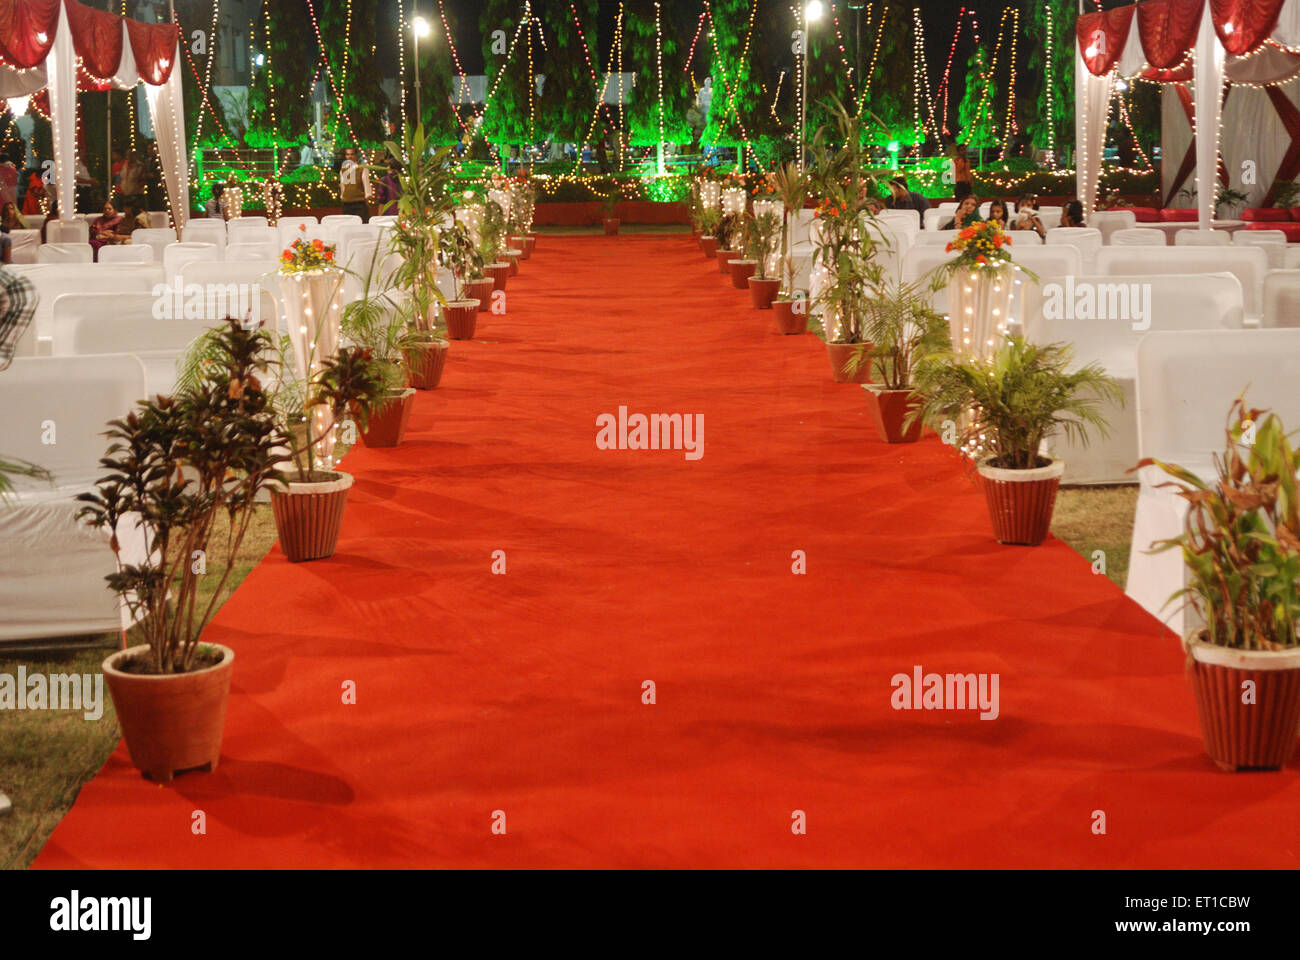 Red carpet India Asia Indian reception Stock Photo